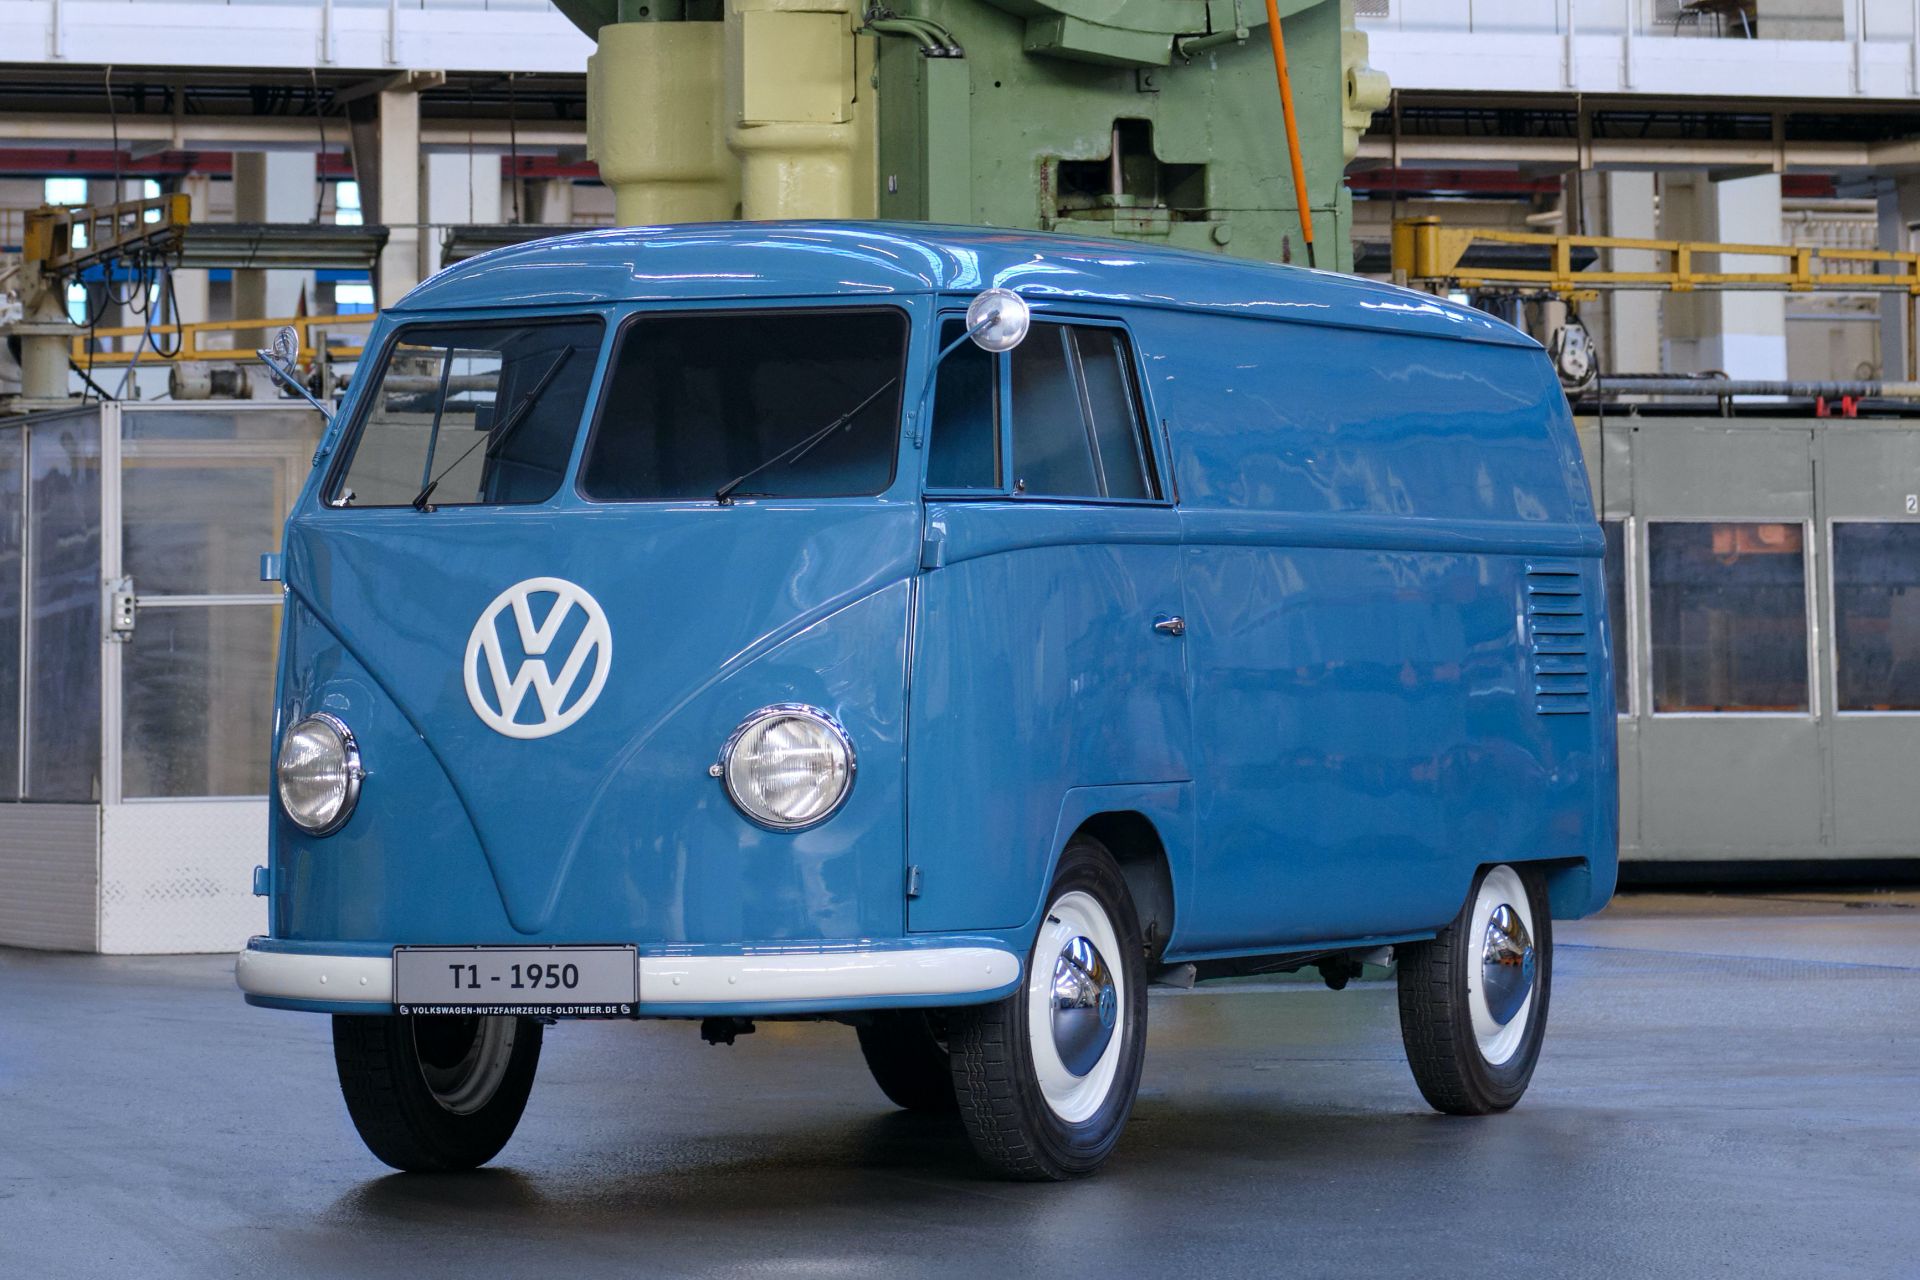 1950 VW Transporter T1 'Sofie' Is The Oldest Known Example In |